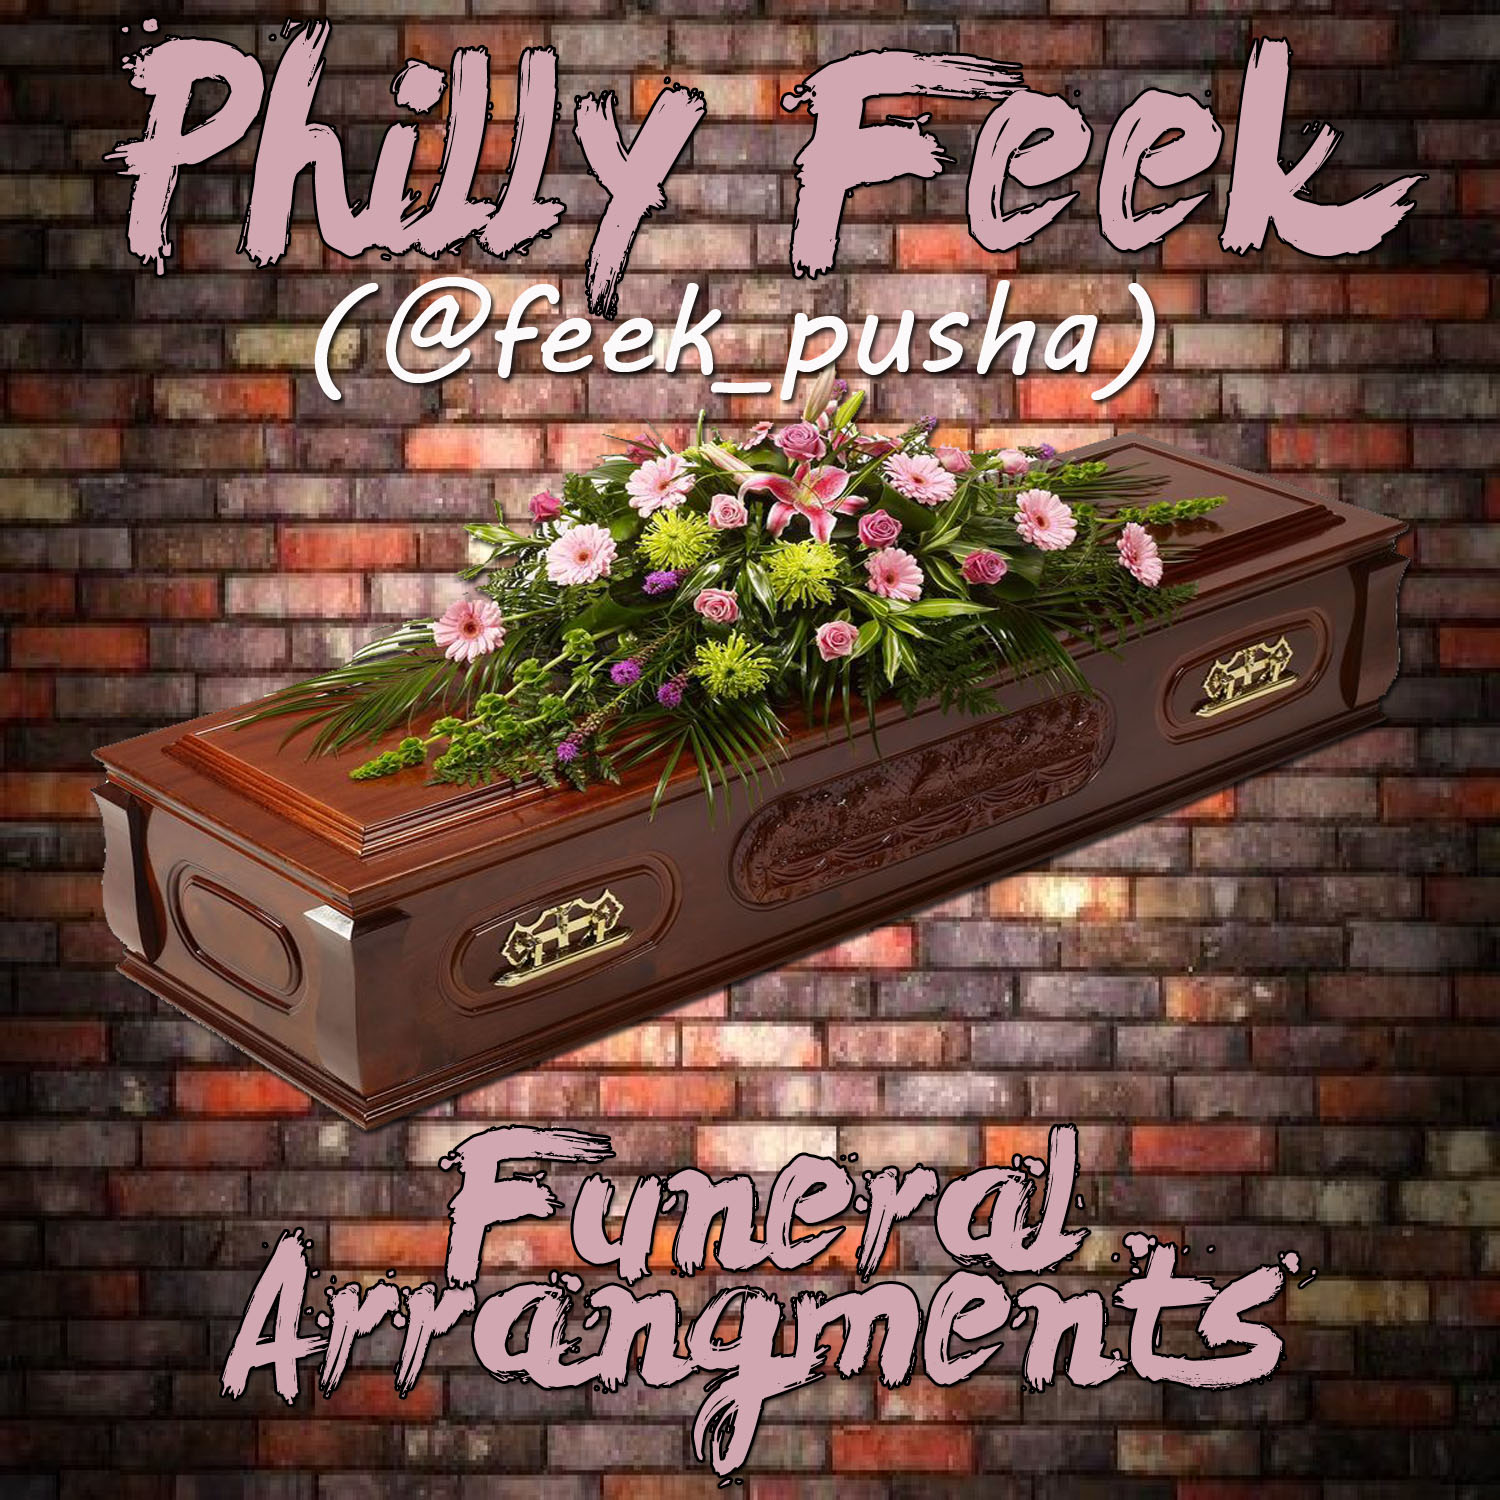 philly-feek-funeral-arrangements-young-sam-diss-prod-by-sarom-soundz-HHS1987-2013 Philly Feek - Funeral Arrangements (Young Sam Diss) (Prod by Sarom Soundz)  